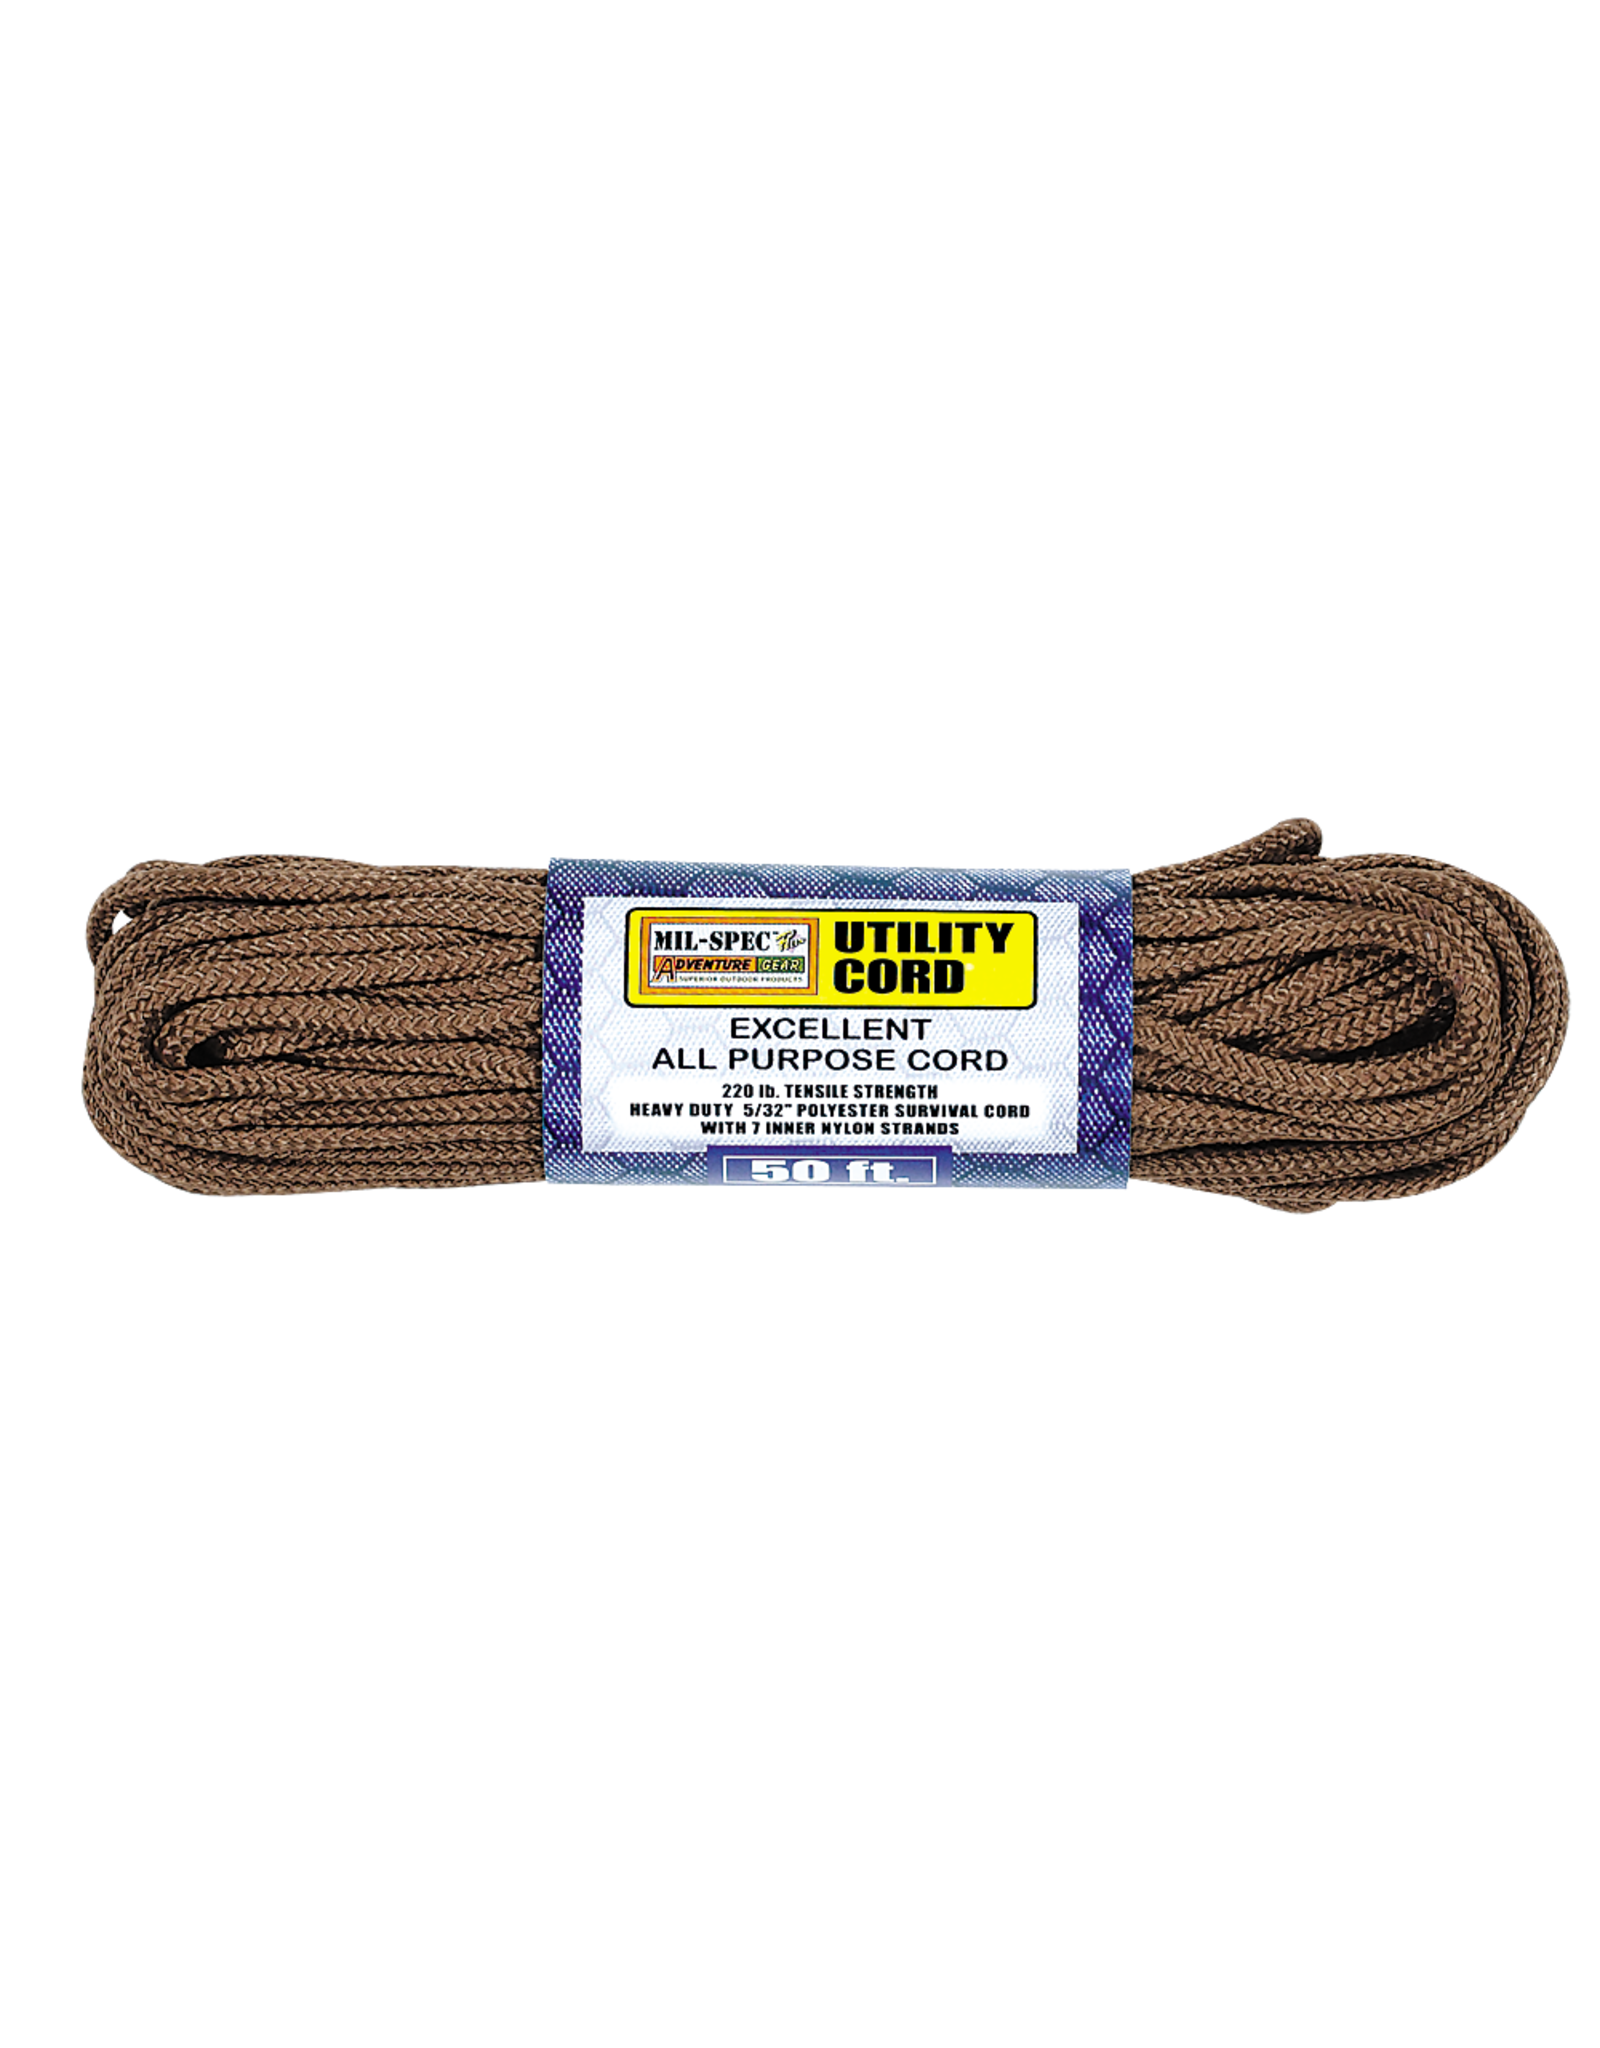 HEAVY DUTY 5/32' POLYESTER SURVIVAL CORD - Smith Army Surplus